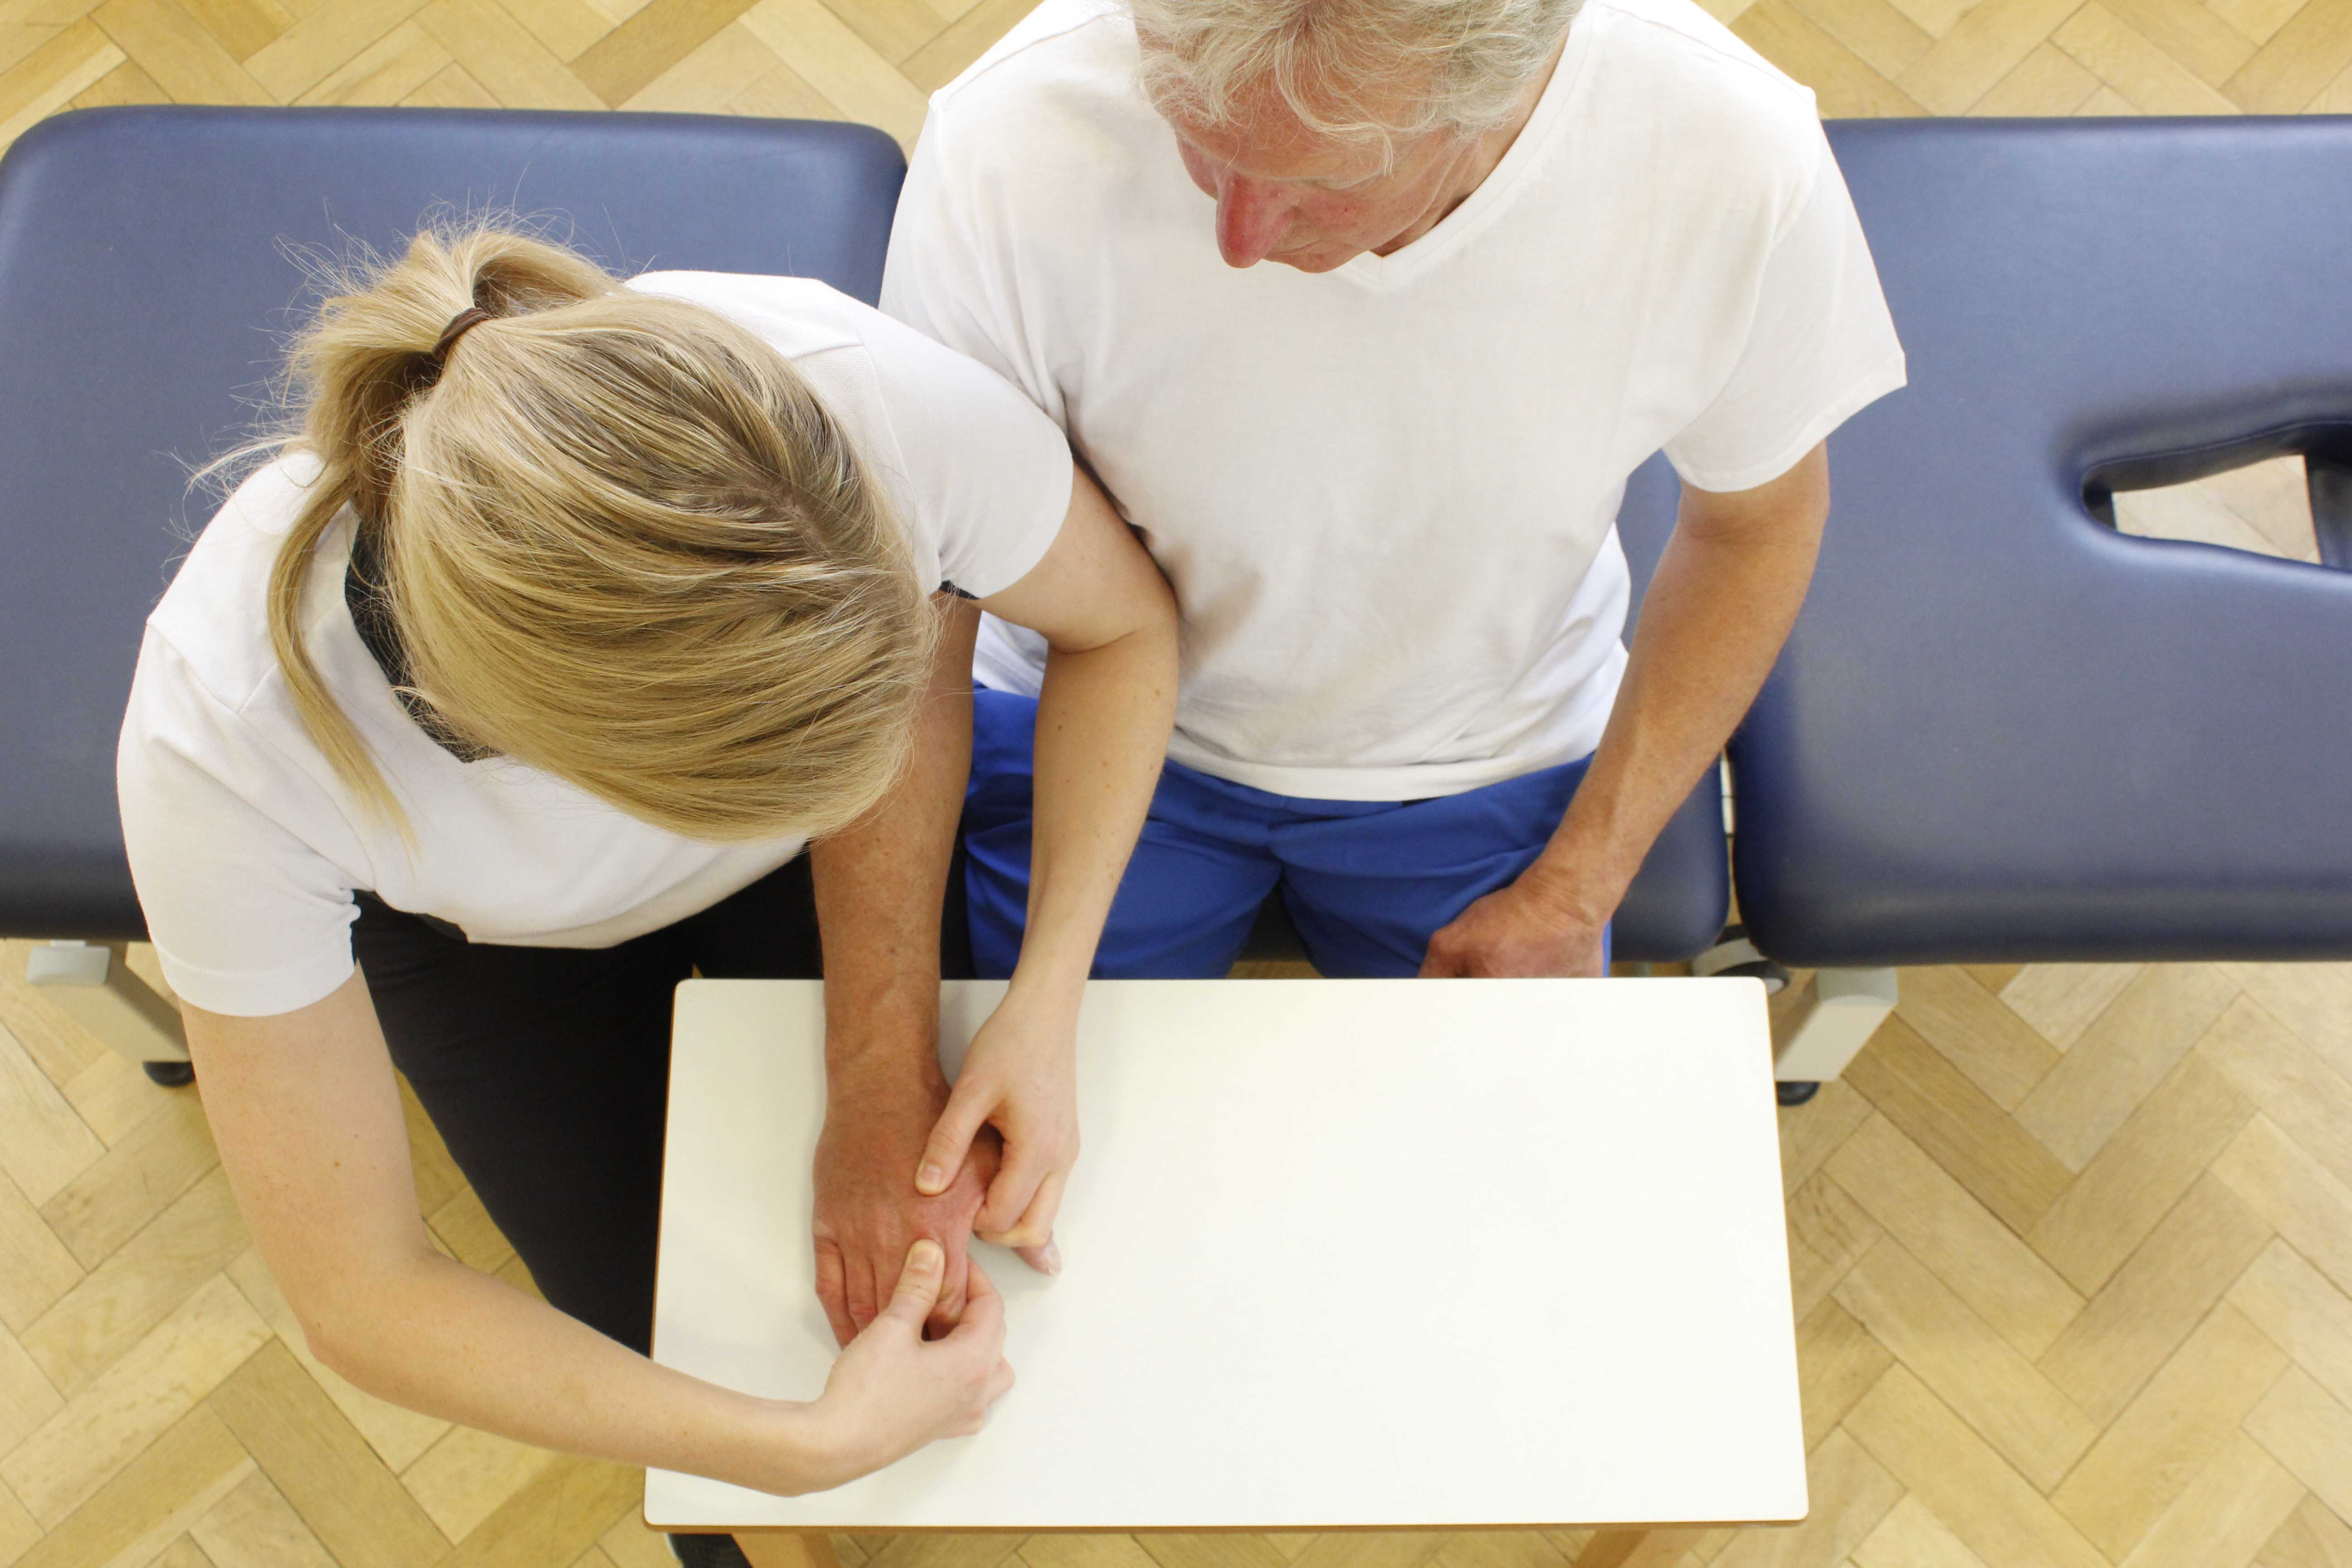 Hand and wrist mobilisations performed by a specialist Physiotherapist